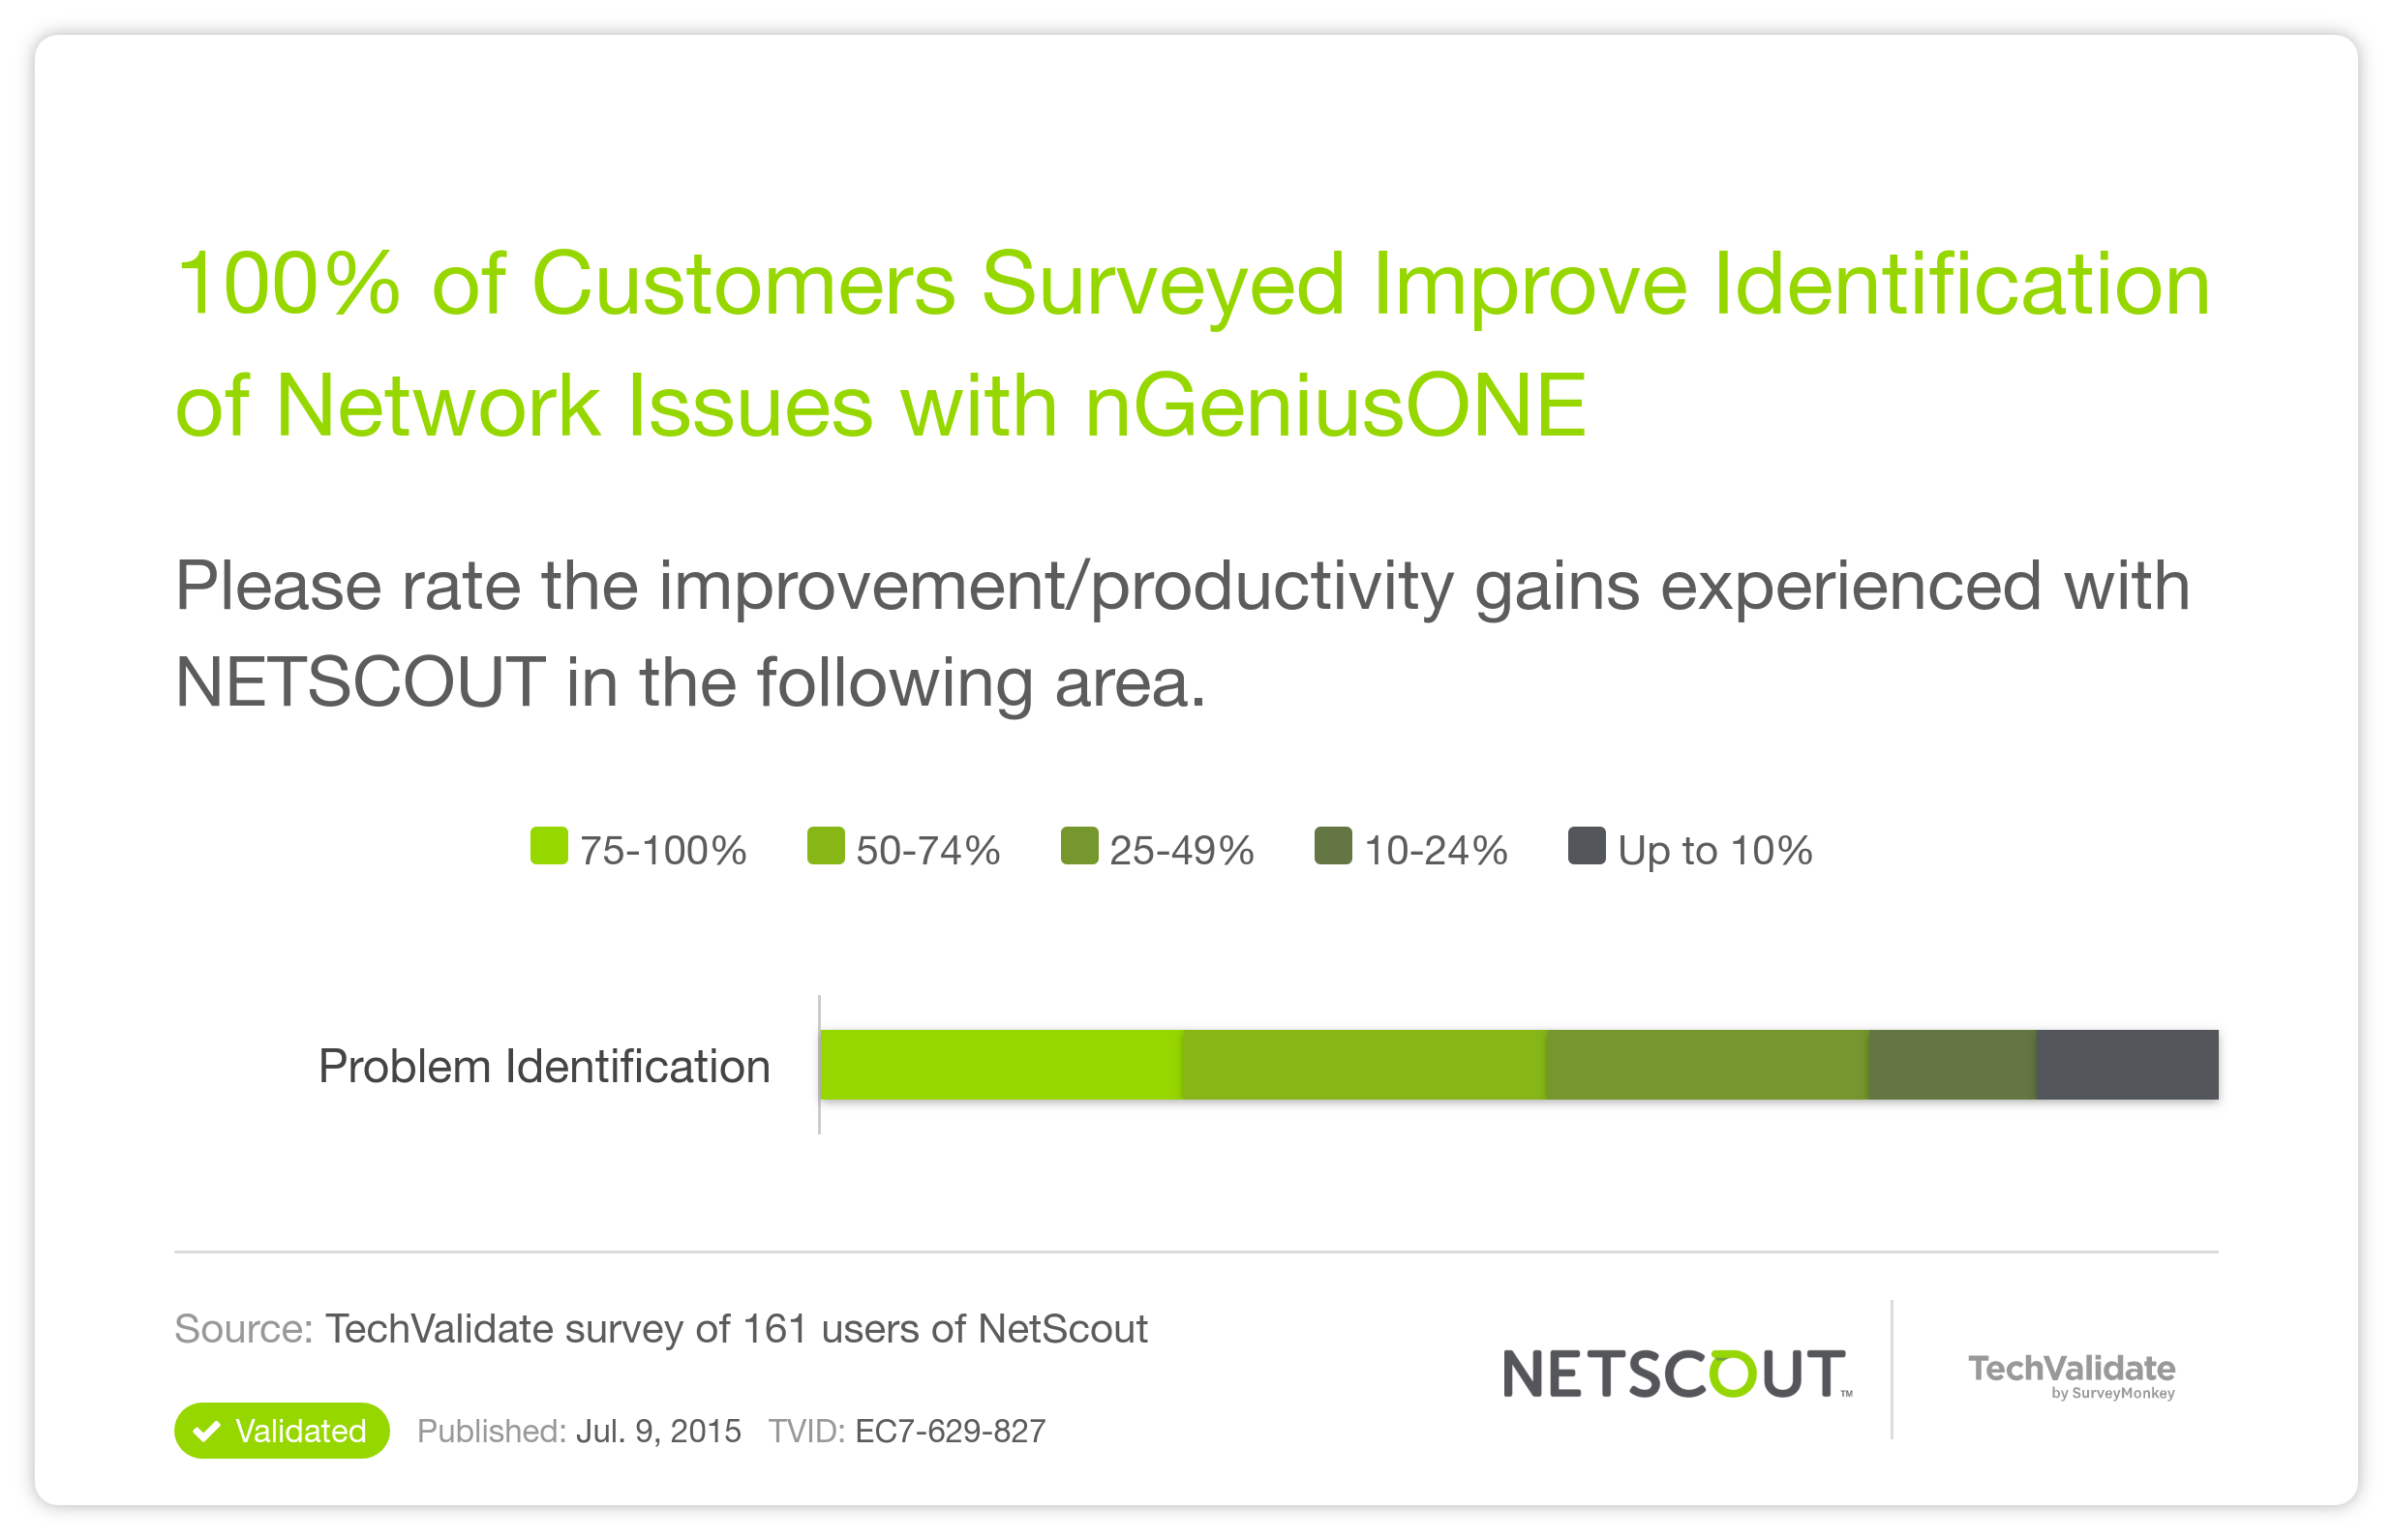 100% of Customers Surveyed Improve Identification of Network Issues with nGeniusONE